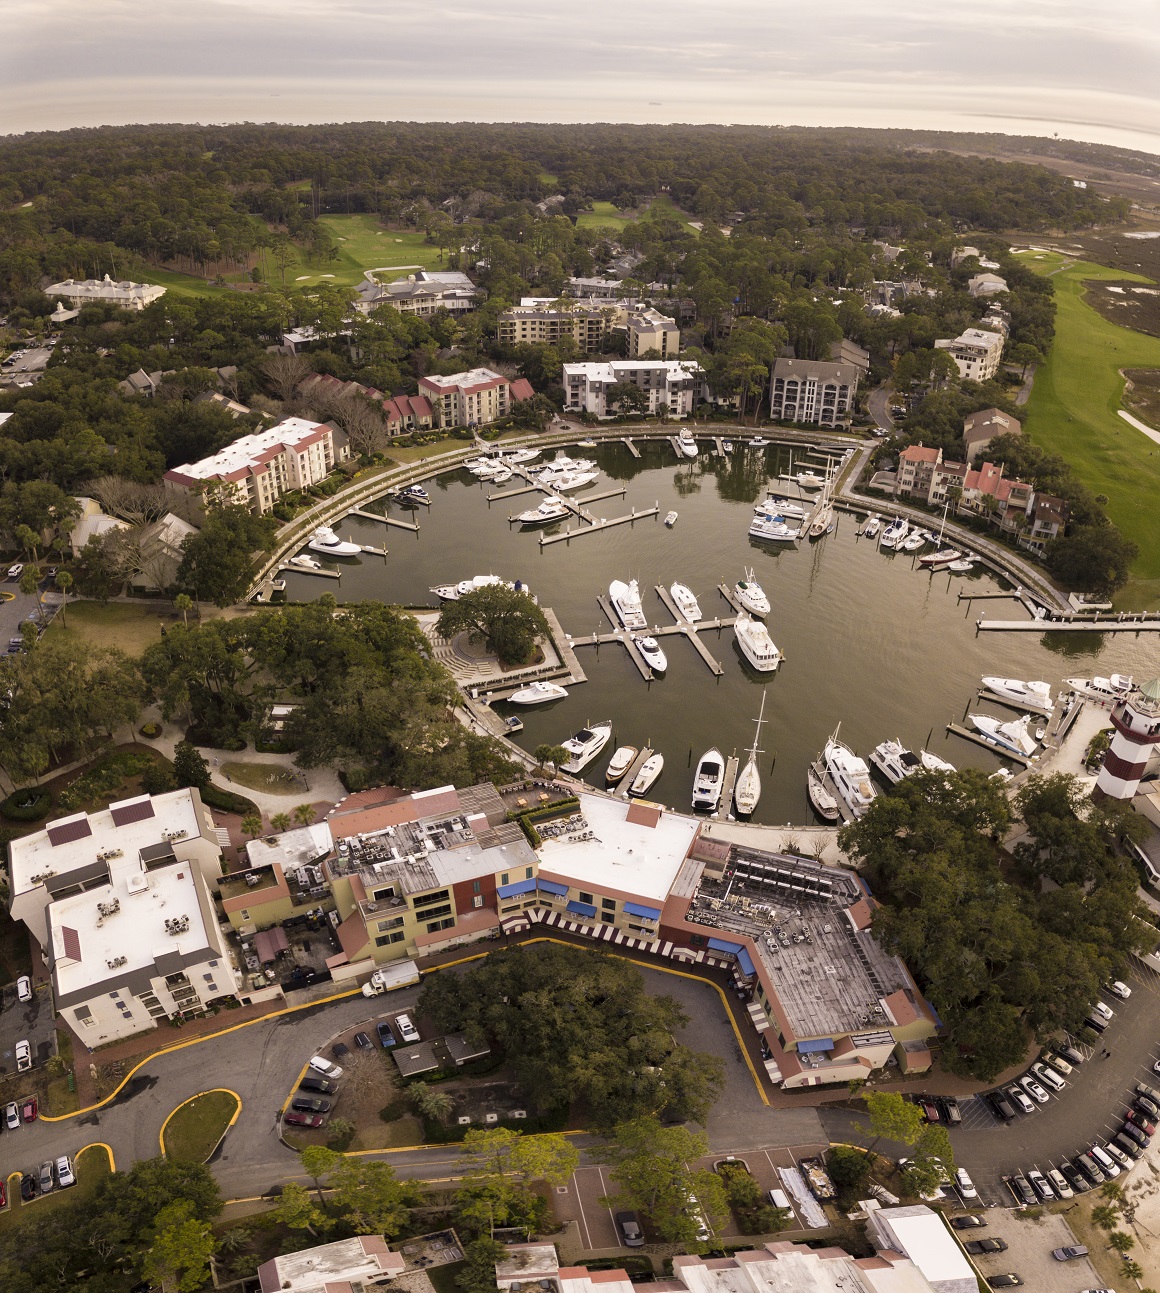 The Club Group, Hilton Head Island's leading property management company, manages the Harbour Town Boat Slip Owners Association